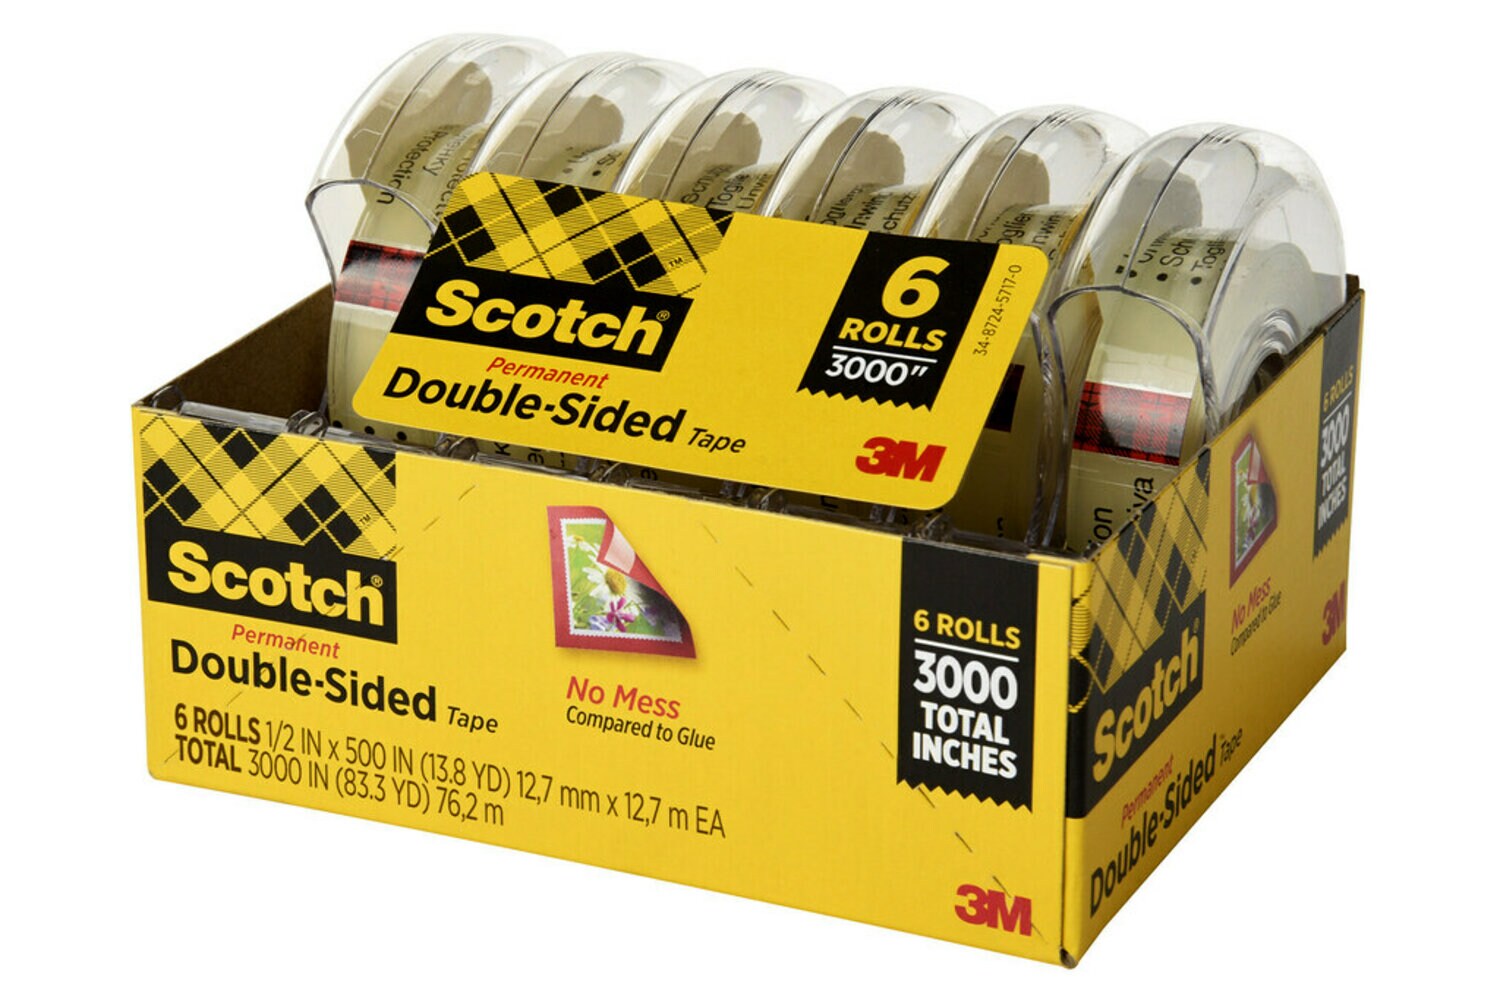 7010384727 - Scotch Double Sided Tape 6137H-2PC-MP 1/2 in x 500 in